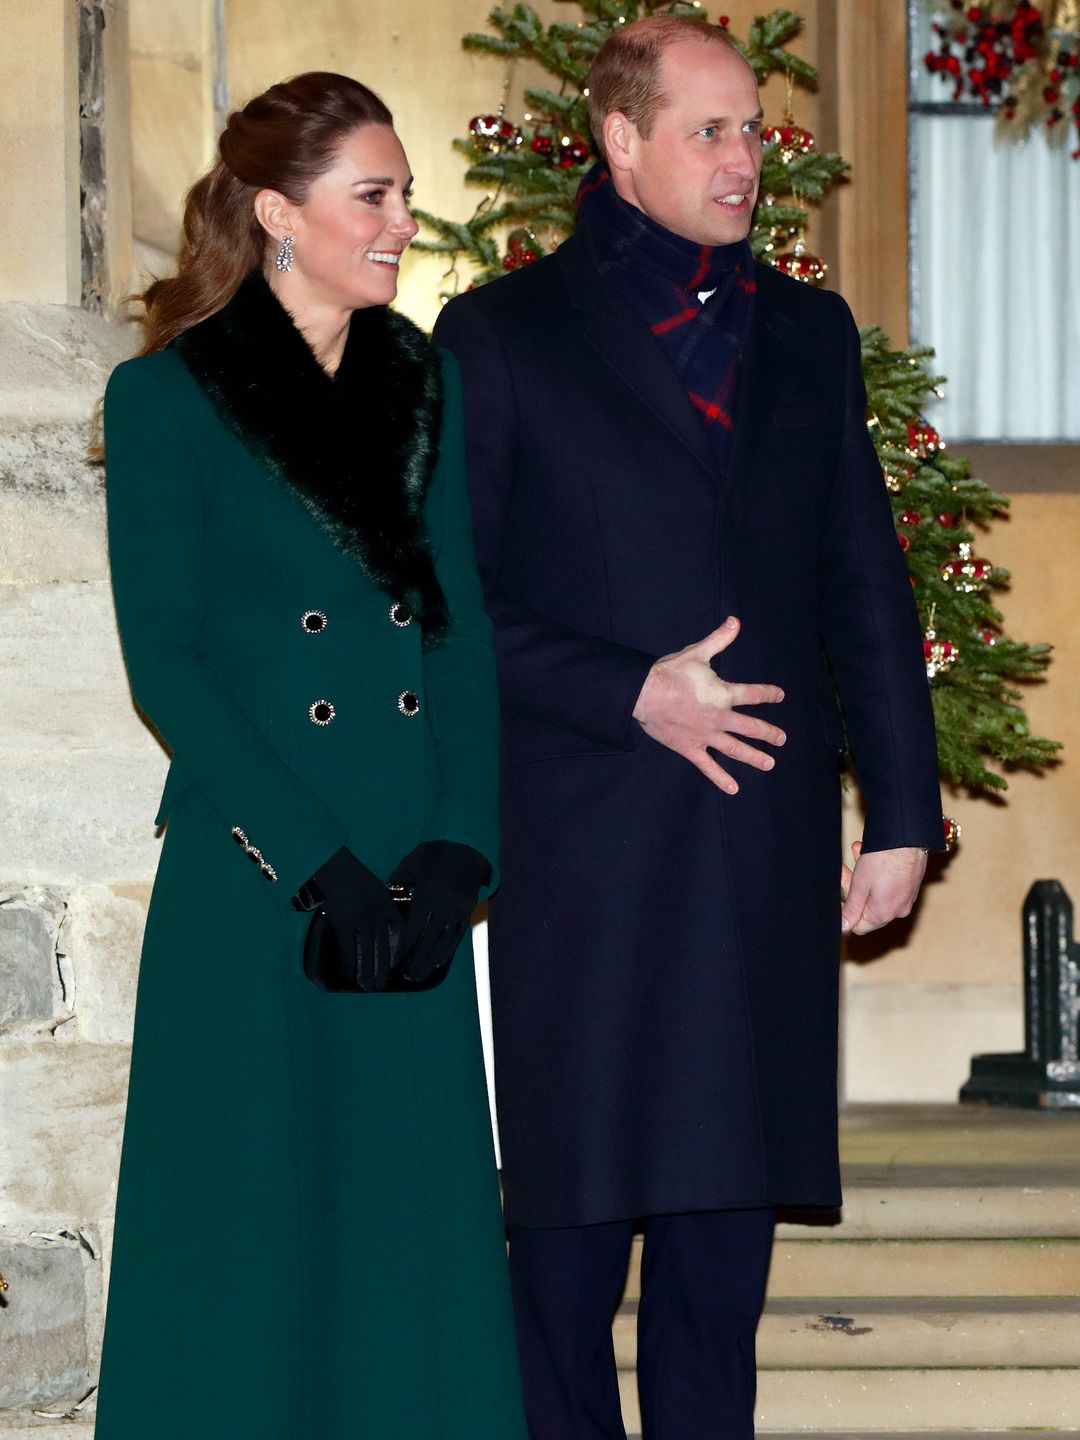 On December 8 at Windsor Castle the royal made some alterations to her coat, to refresh it for the colder season. 